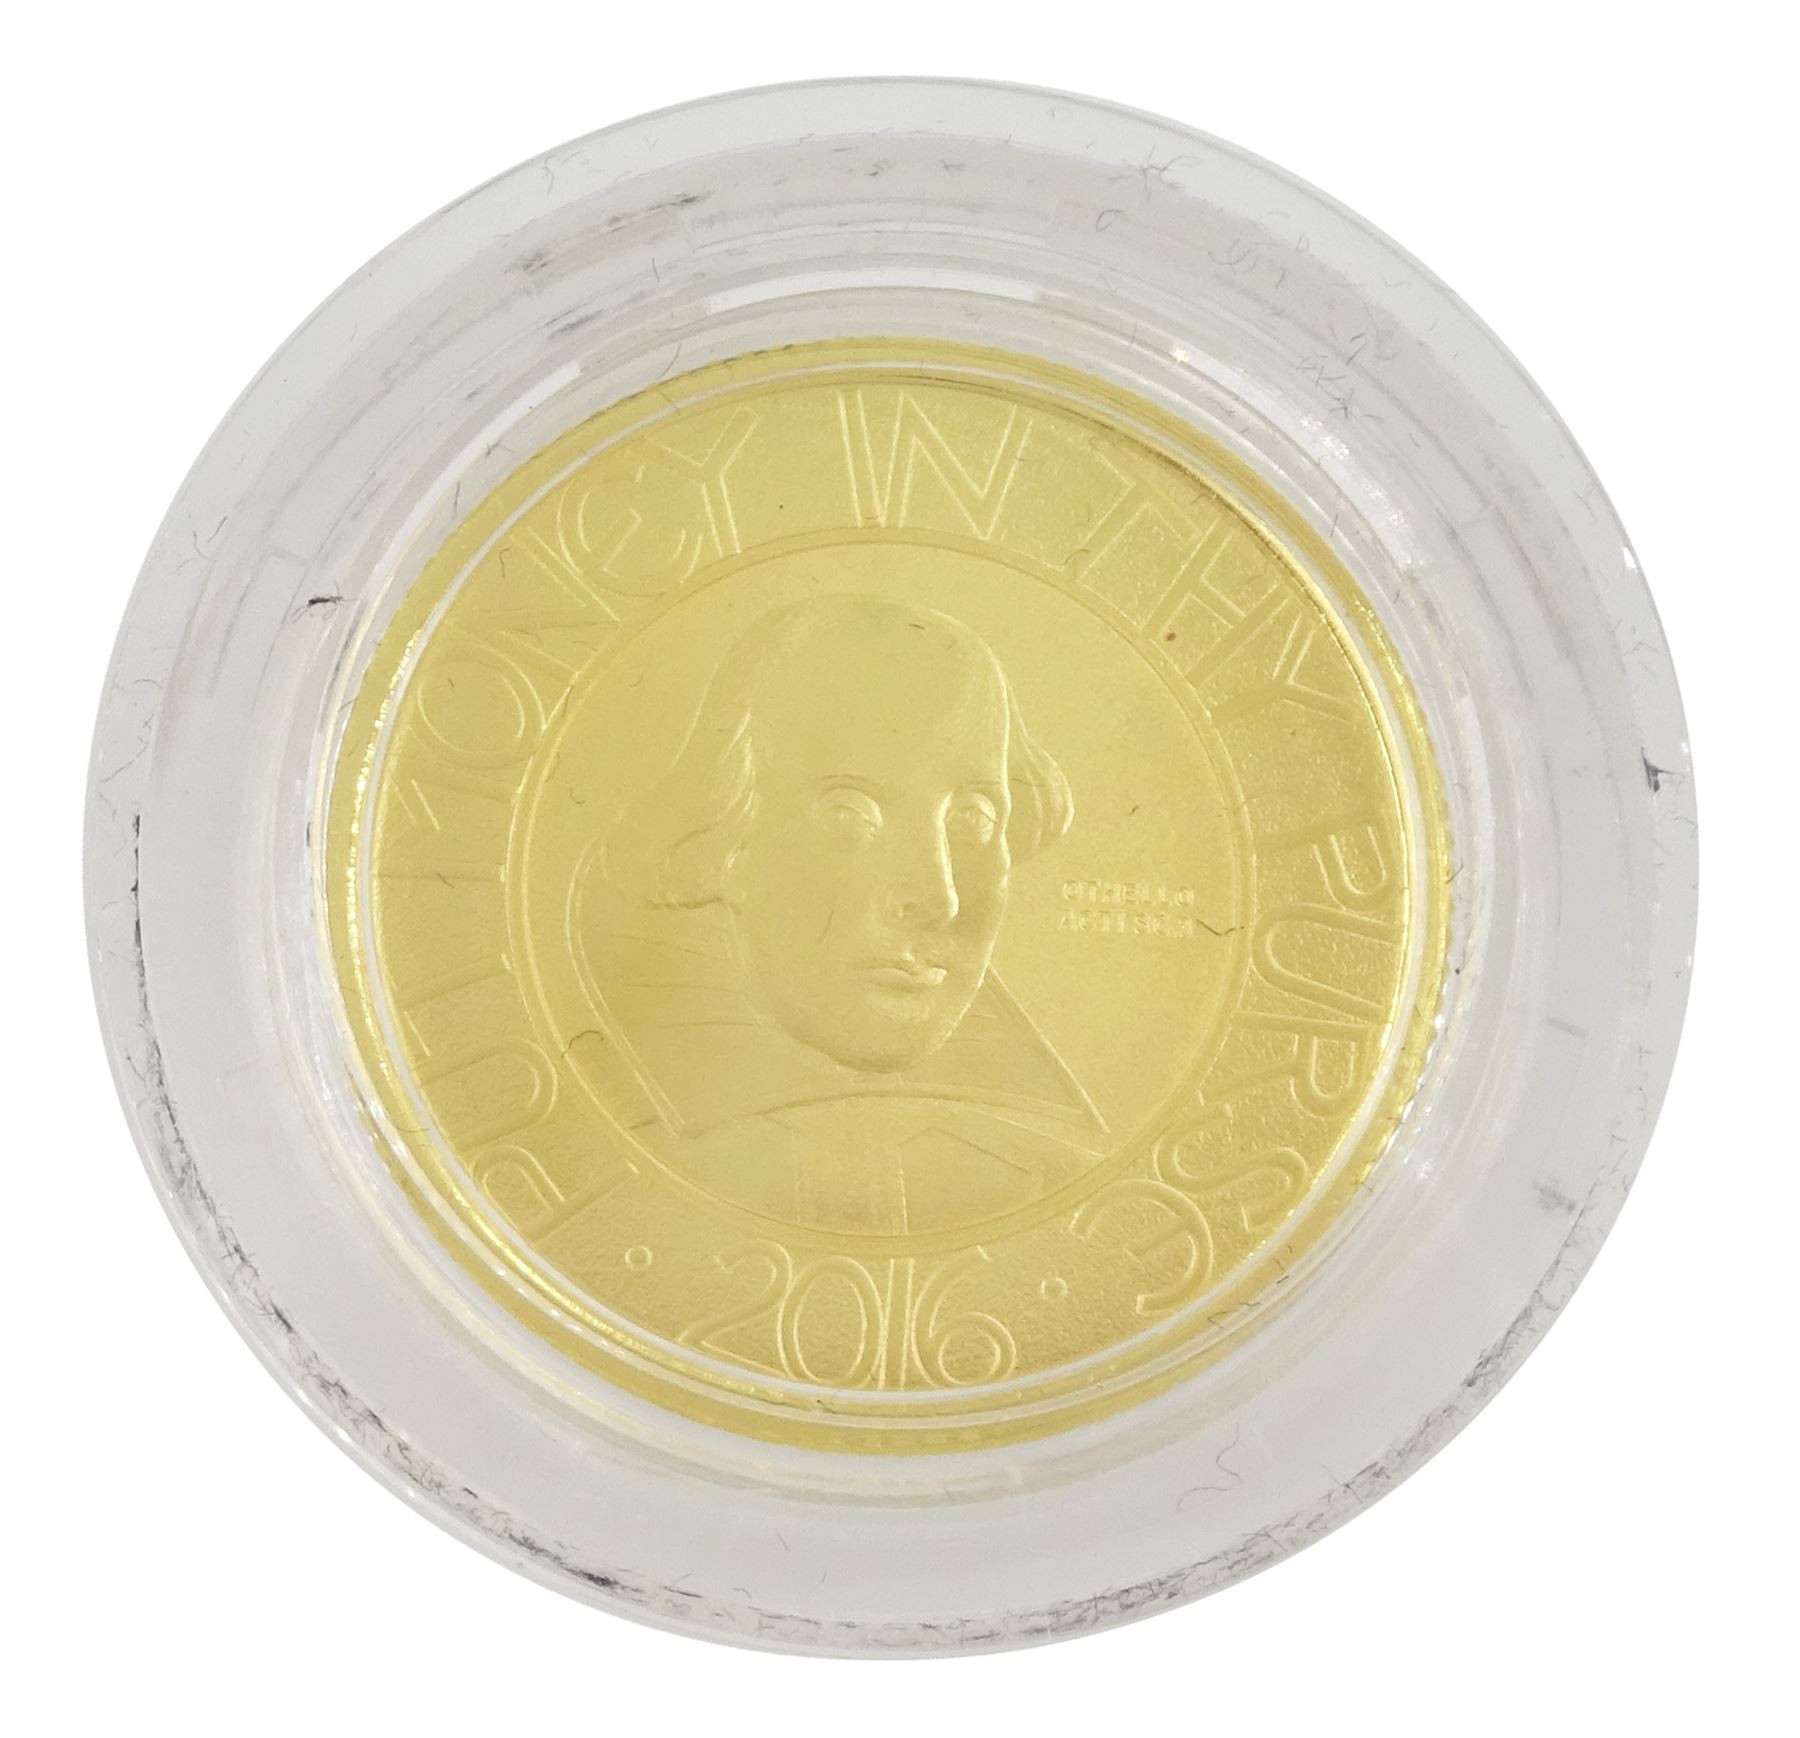 Queen Elizabeth II 2016 'Shakespeare' gold proof quarter ounce twenty five pounds coin - Image 2 of 3